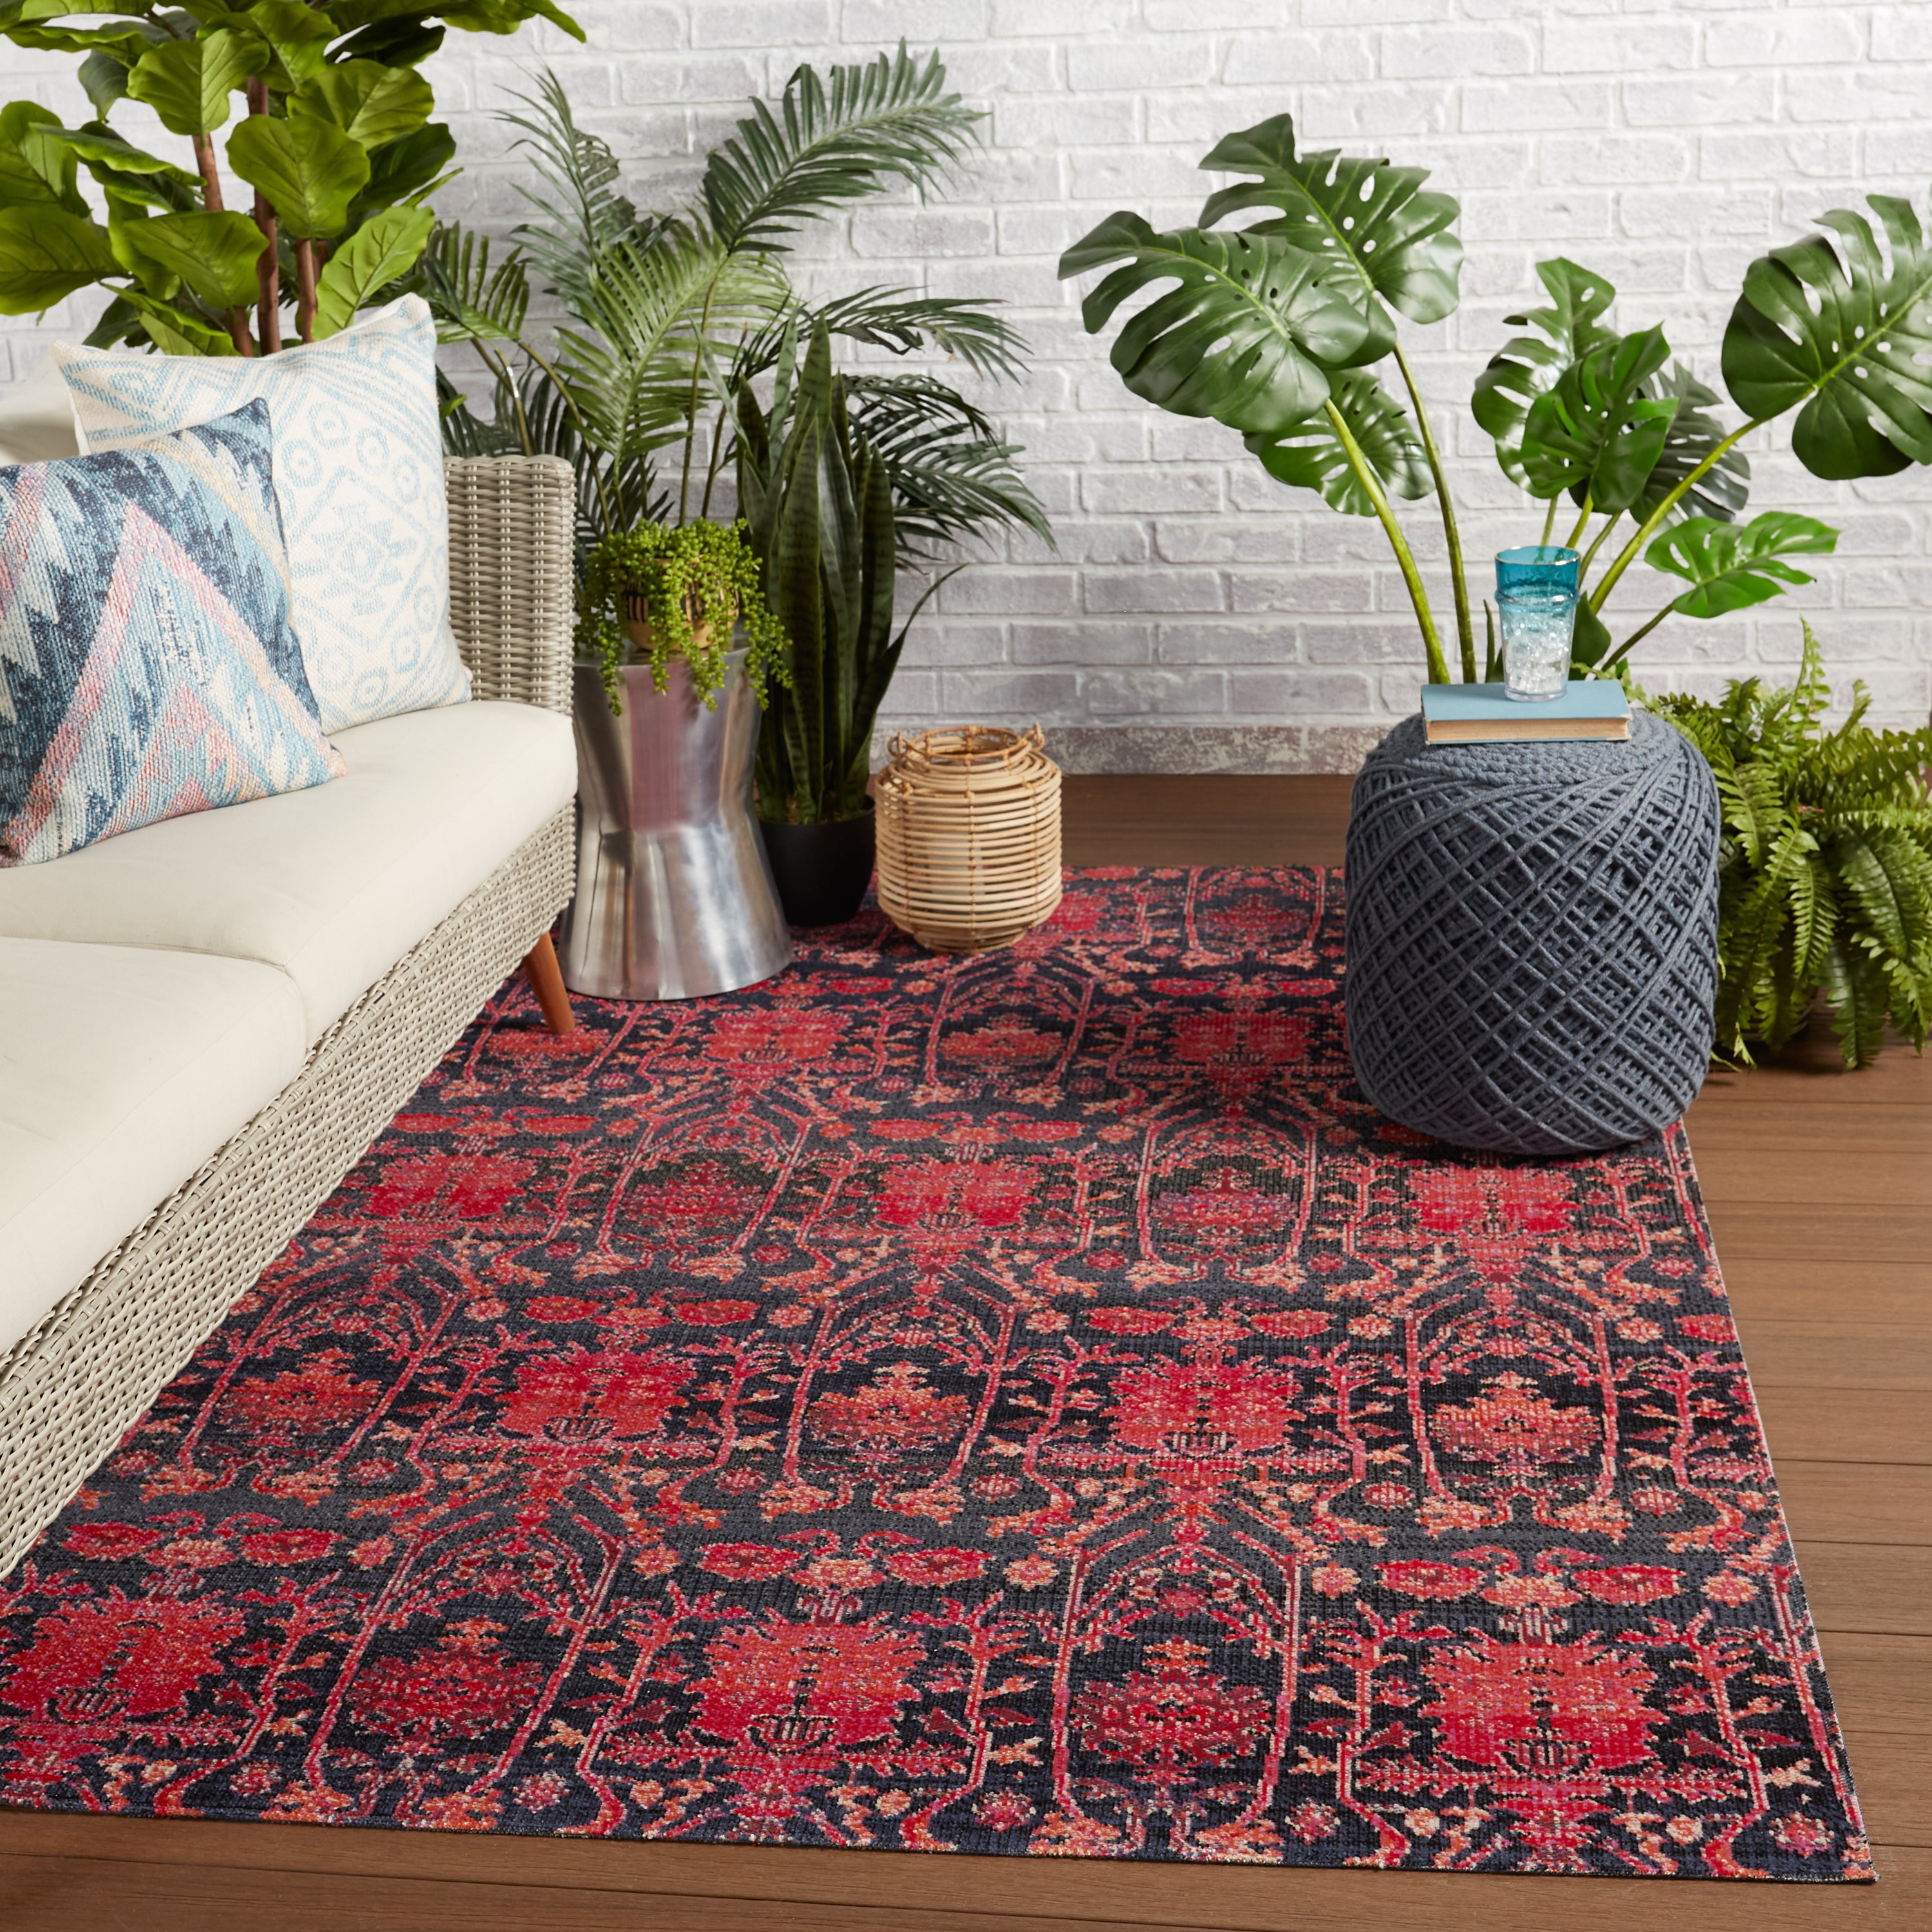 Tranquility Radiance Indoor/ Outdoor Trellis Red/ Blue Area Rug